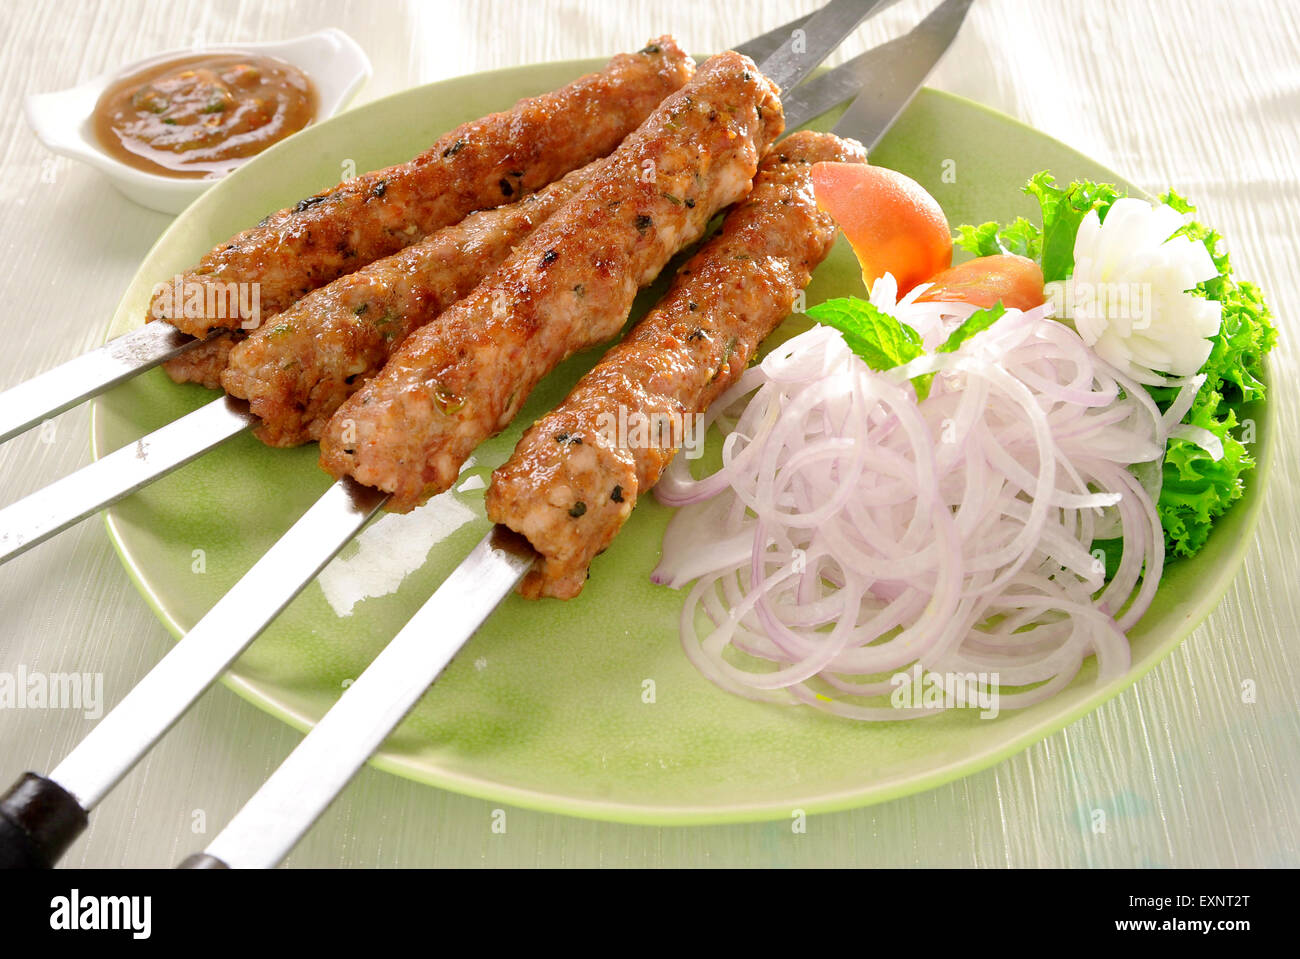 Seekh Kababs ou Chicken Reshmi Kababs Banque D'Images